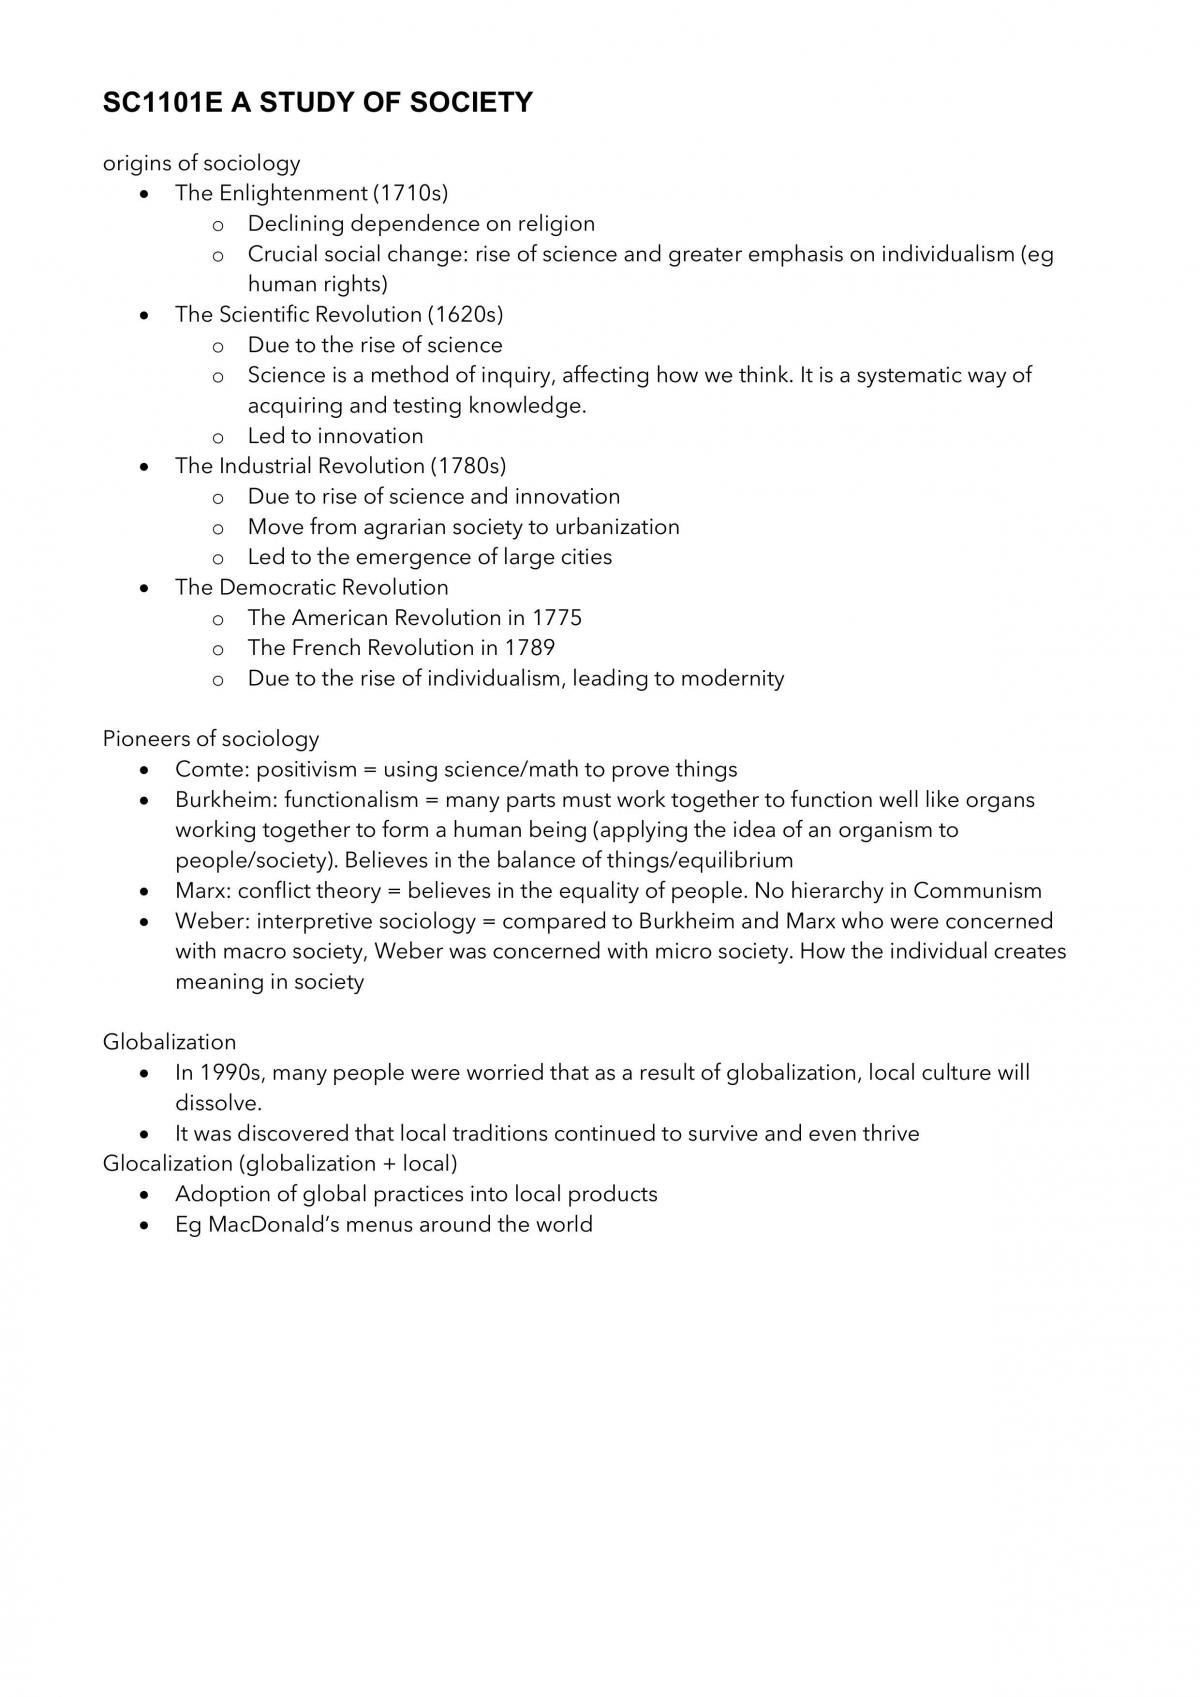 SC1101E A Study of Society Complete Study Notes - Page 1